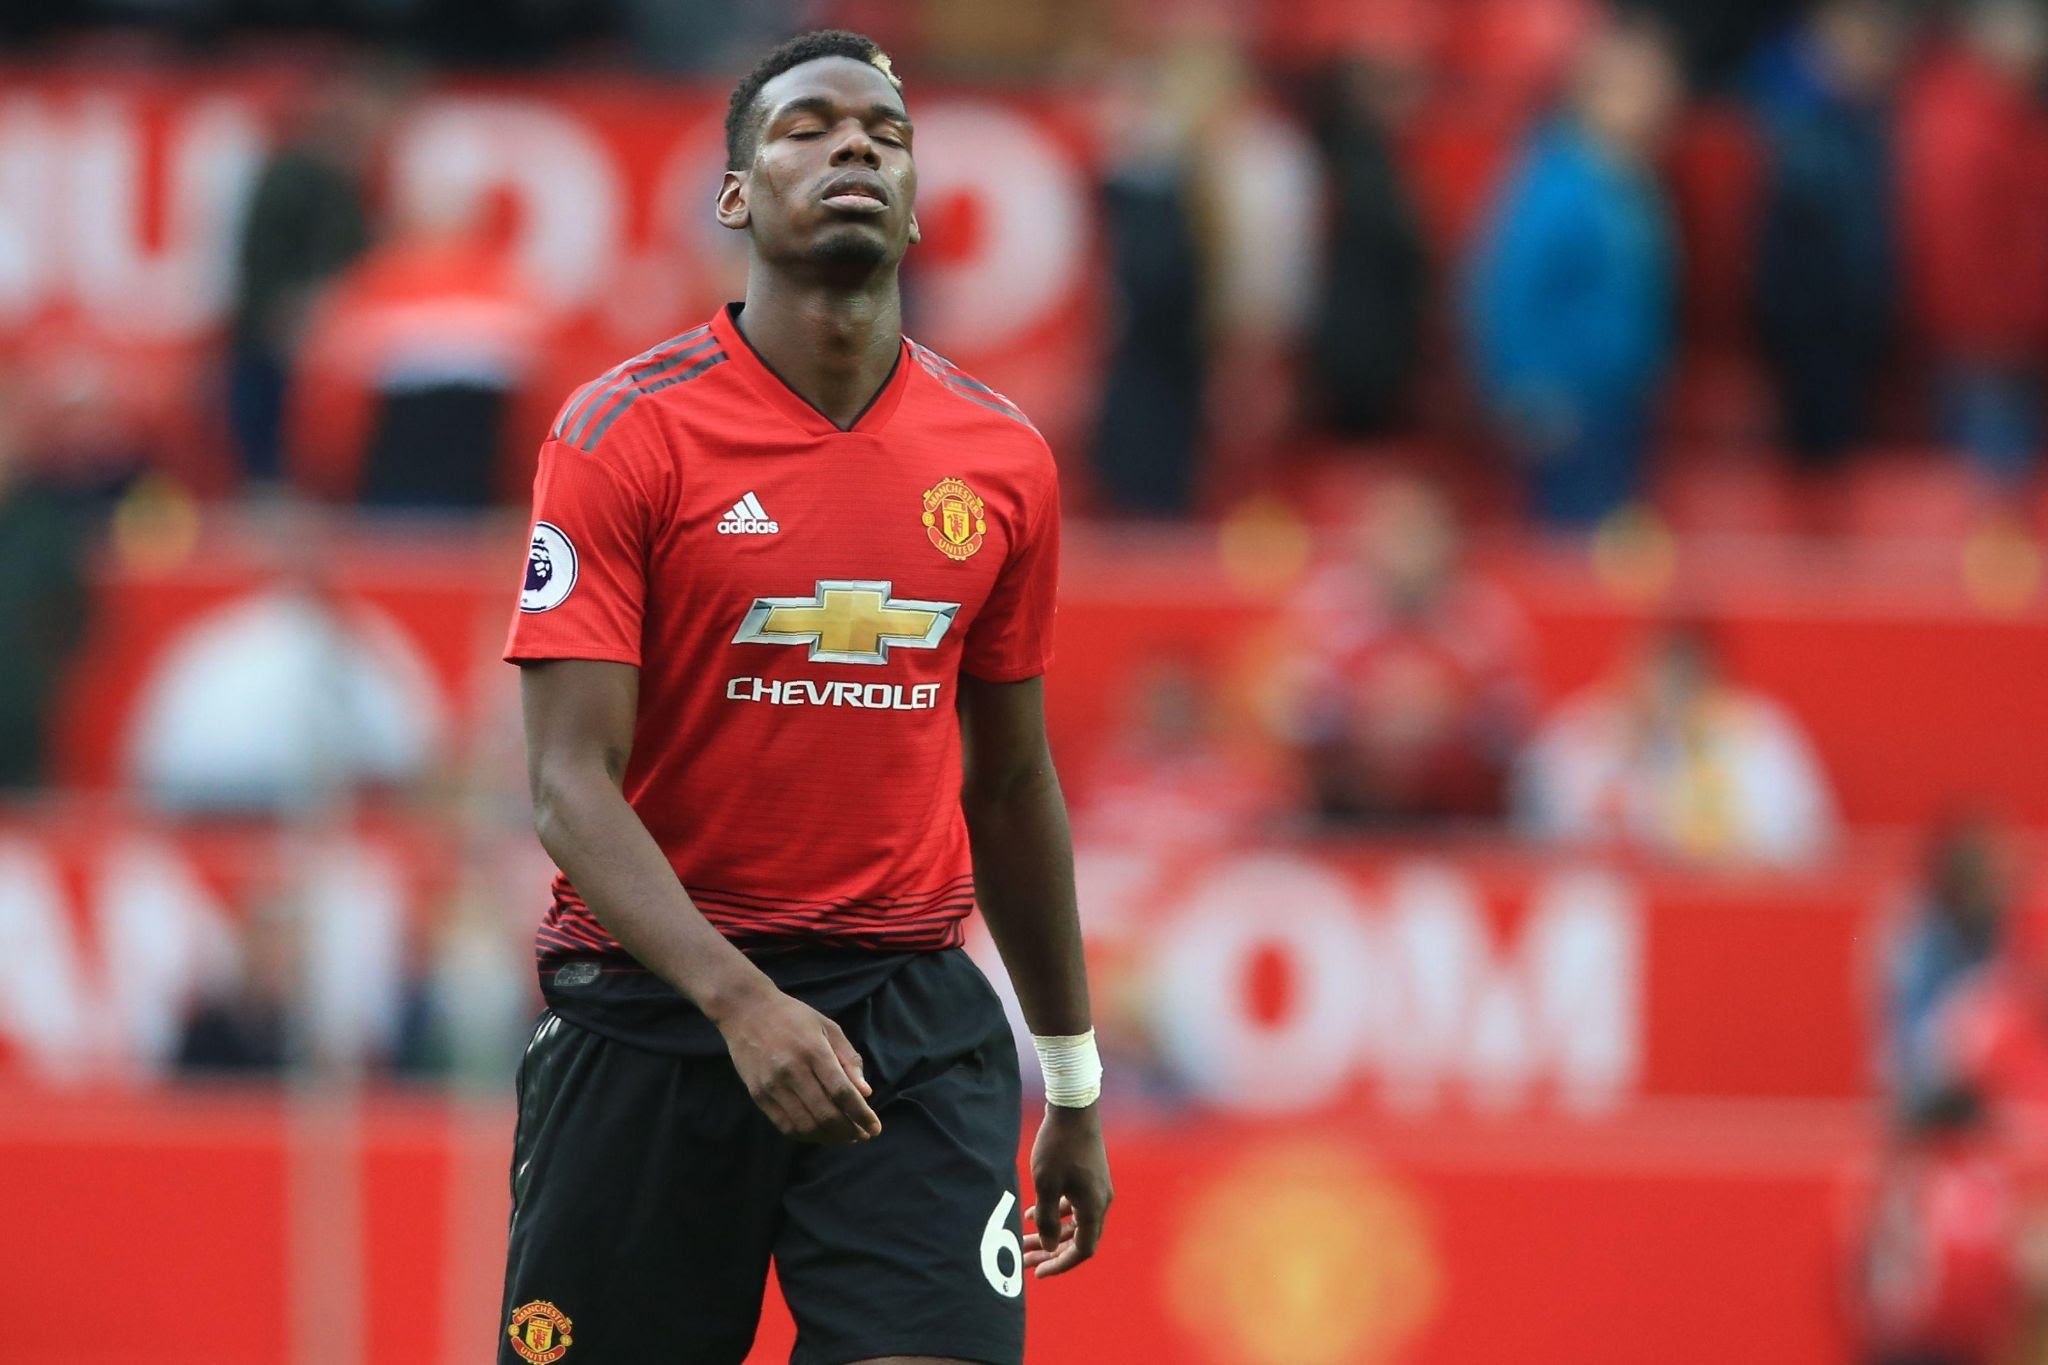 We have conceded easy and stupid goals: Pogba